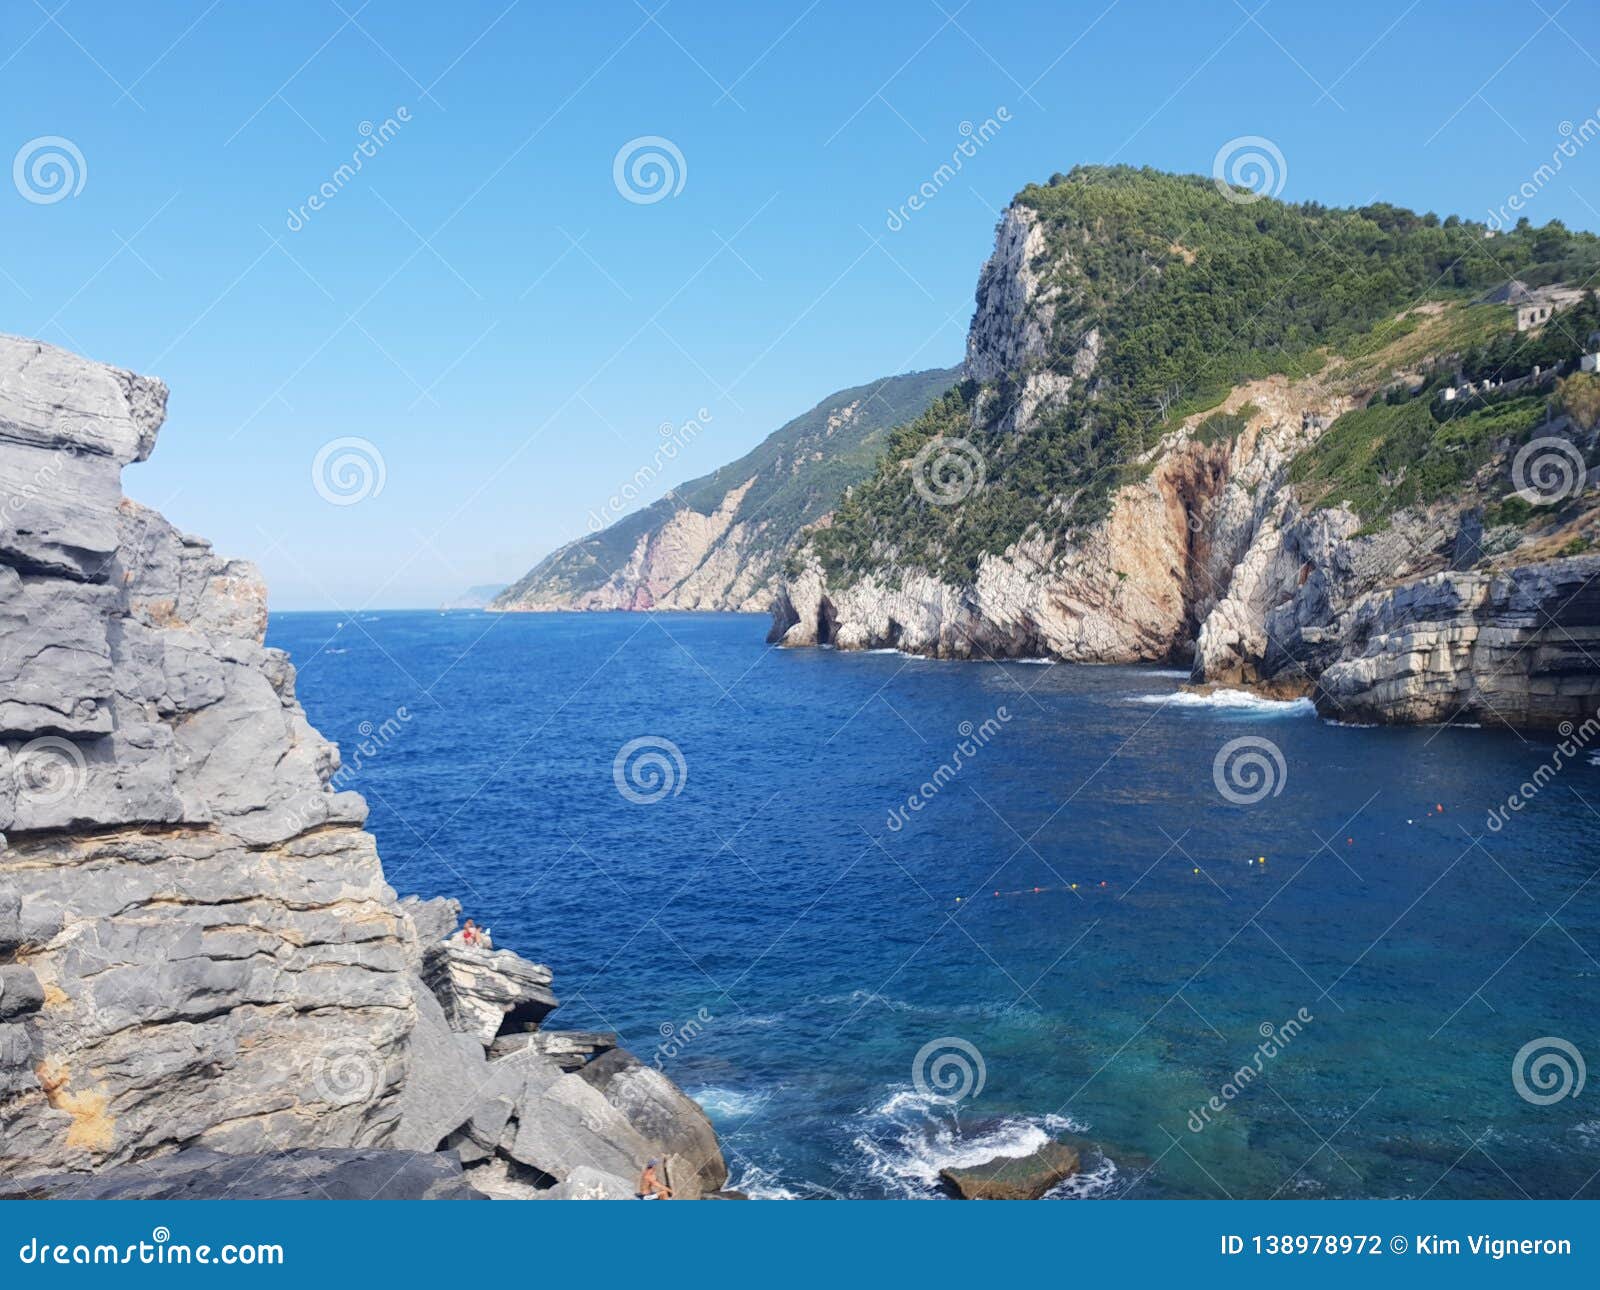 A Sea and a Mountain in Portovenere, Italy Stock Photo - Image of ...